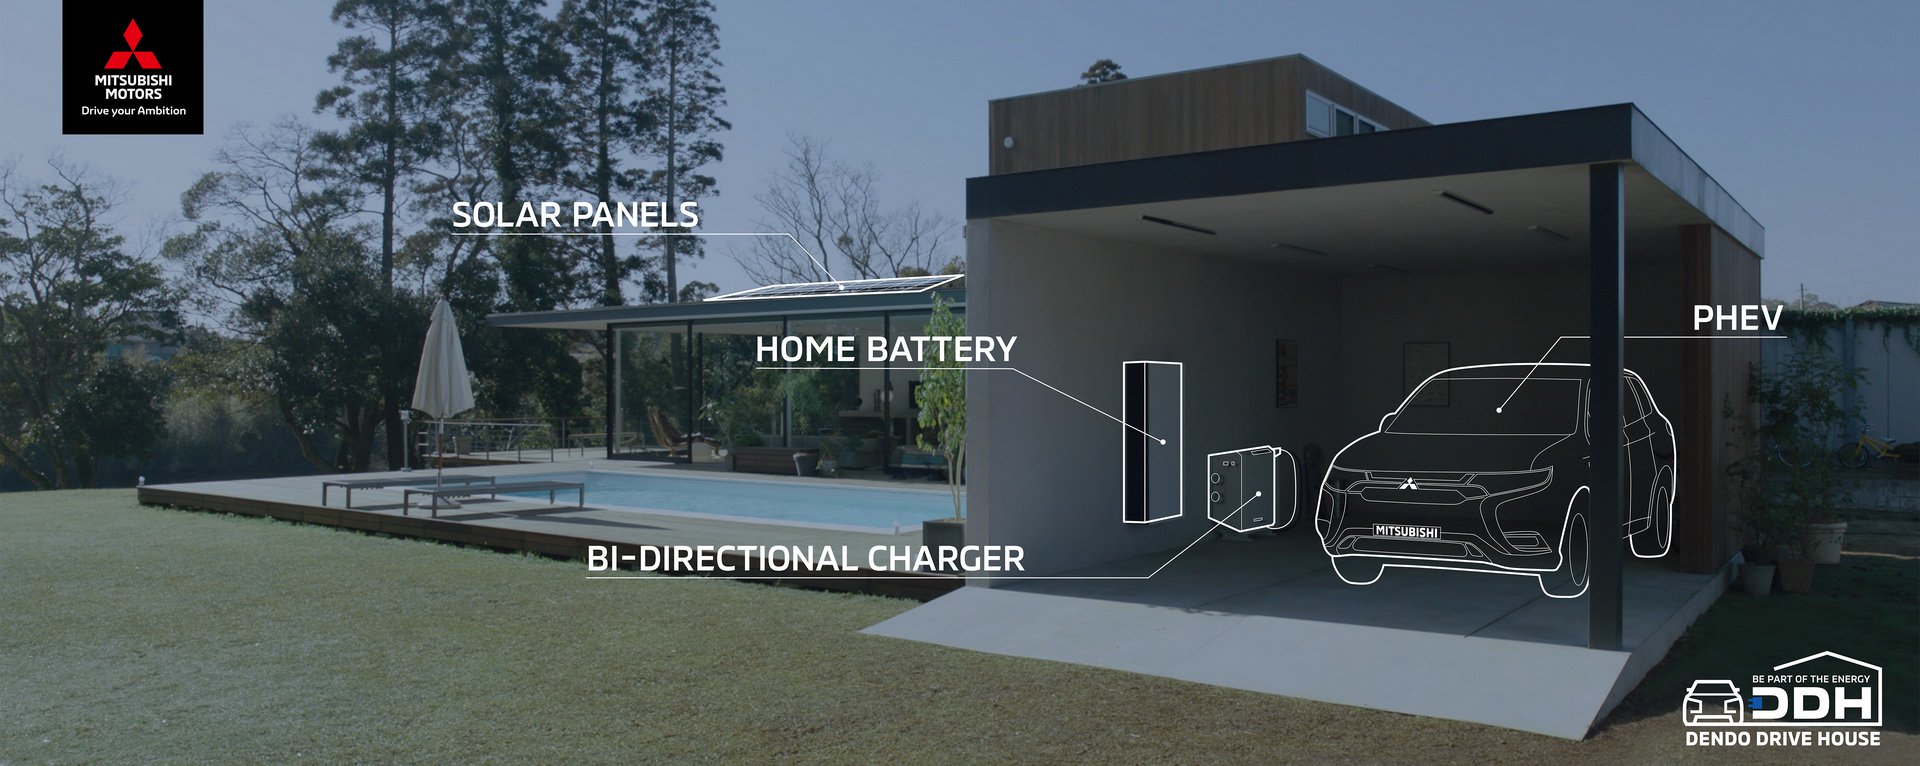 Mitsubishi home energy packaged system